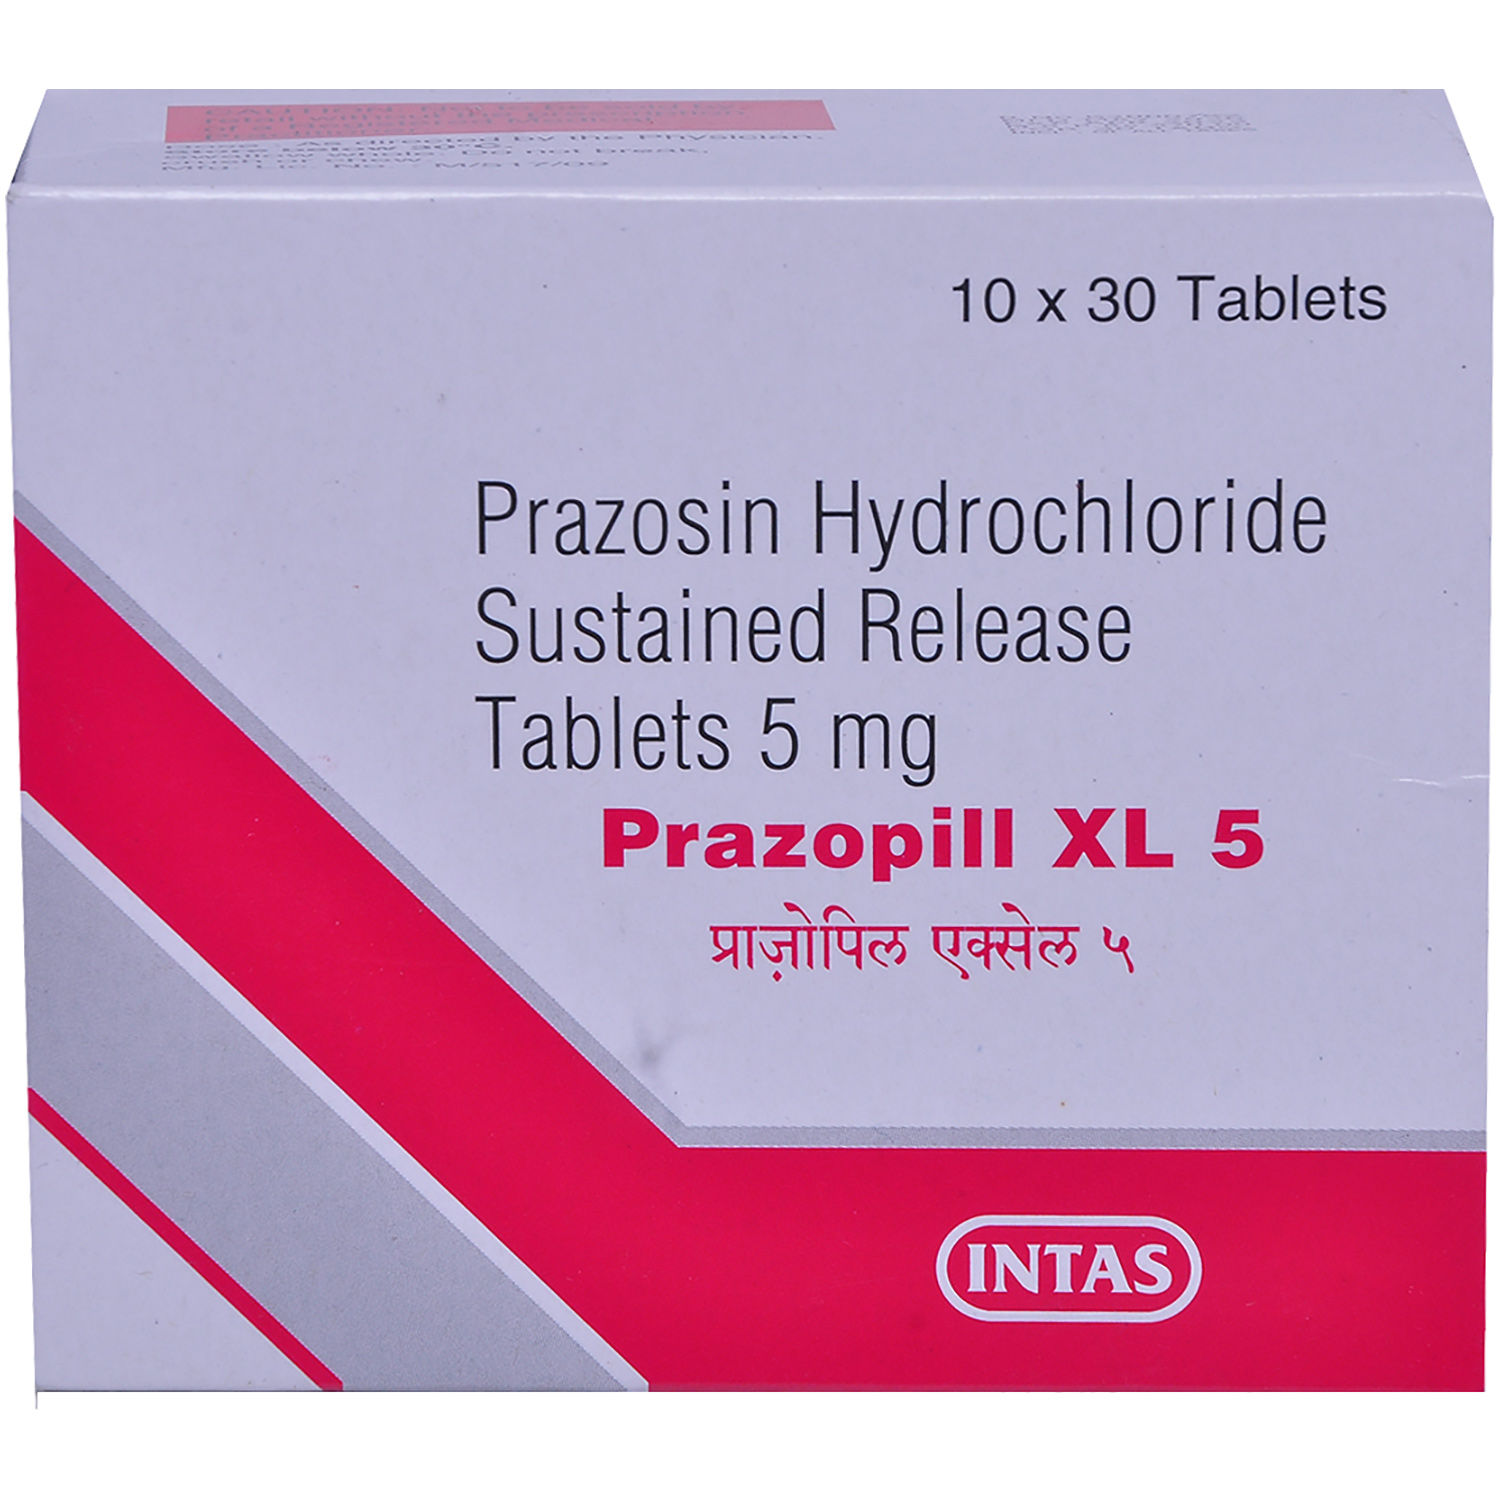 Prazopill XL 5 Tablet 30's Price, Uses, Side Effects, Composition